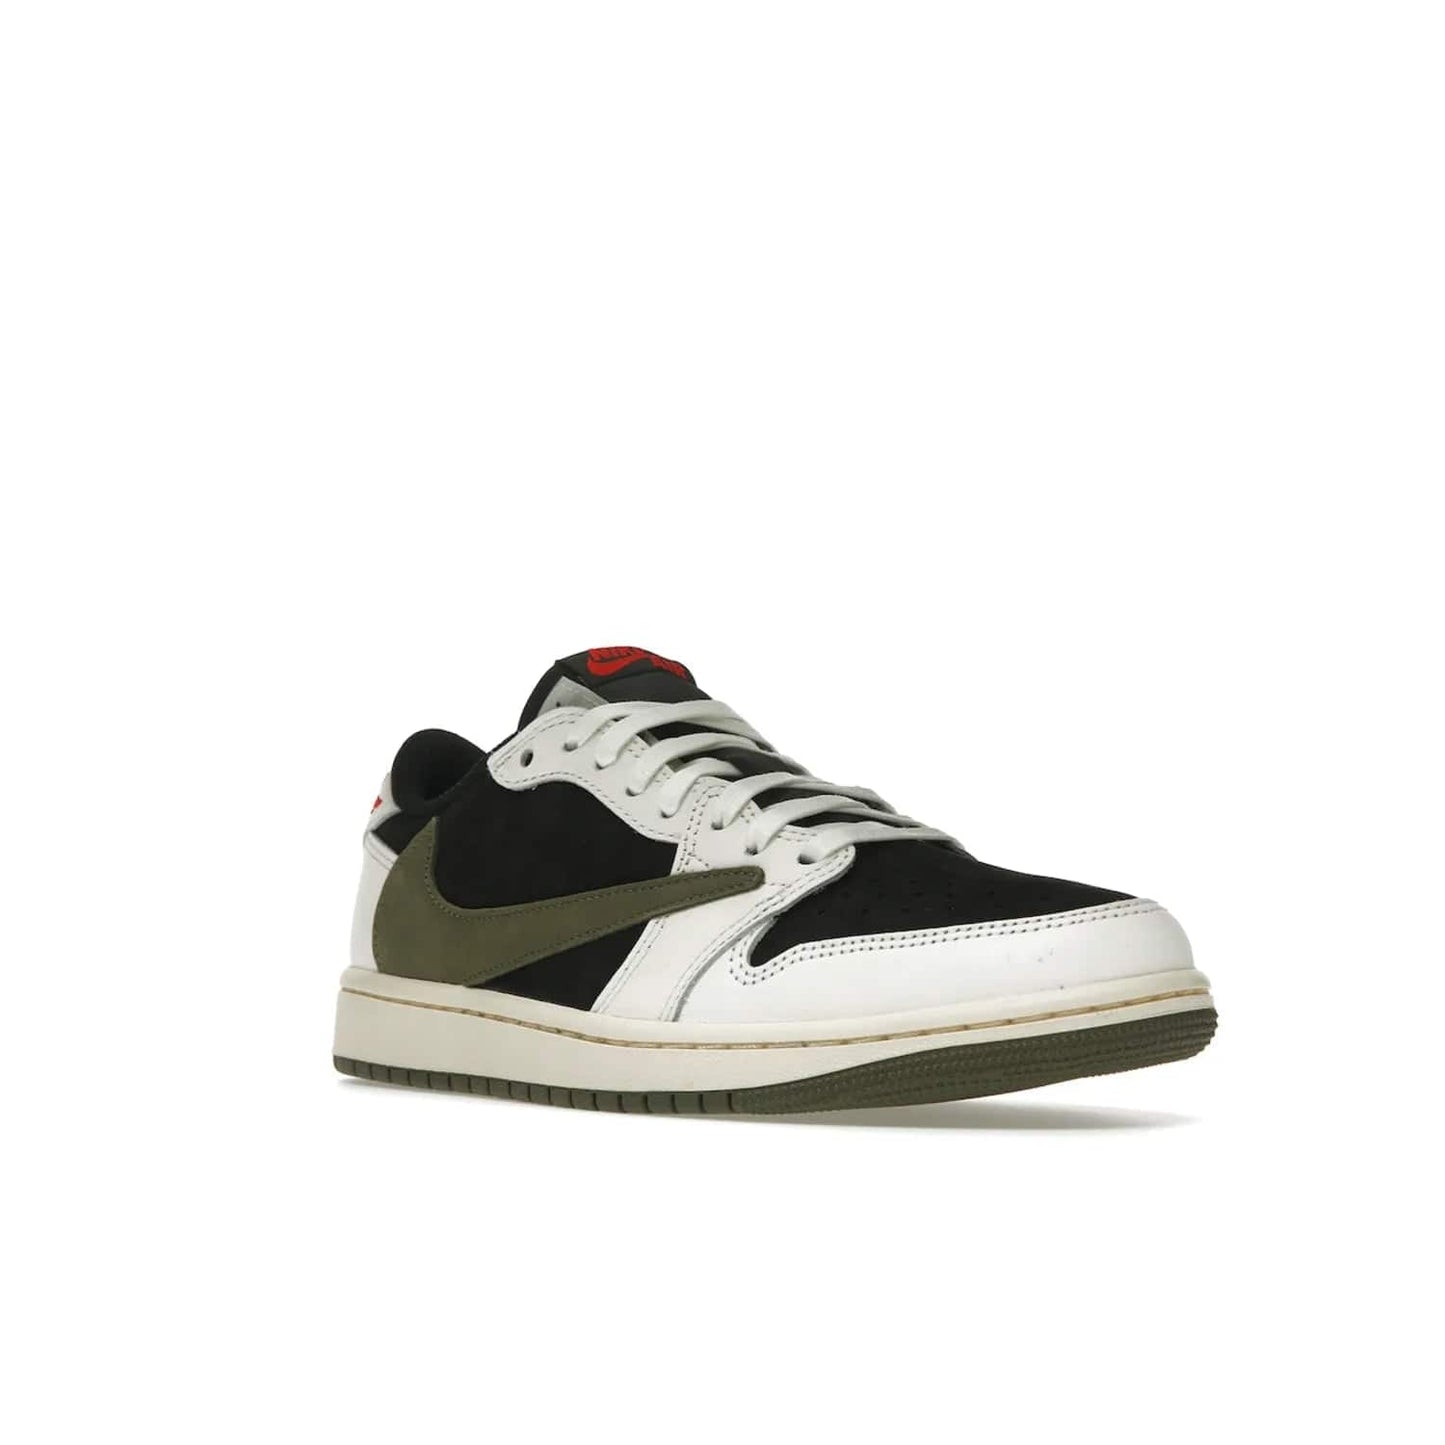 Jordan 1 Retro Low OG SP Travis Scott Olive (Women's) - Image 6 - Only at www.BallersClubKickz.com - Score style points with the Air Jordan 1 Retro Low OG SP Travis Scott Olive exclusively in womens sizing. White leather and black nubuck uppers, plus signature reverse style Nike Swoosh and aged midsole atop olive green outsole. Stand out with these stylish and eye-catching sneakers, dropping April 26, 2023.